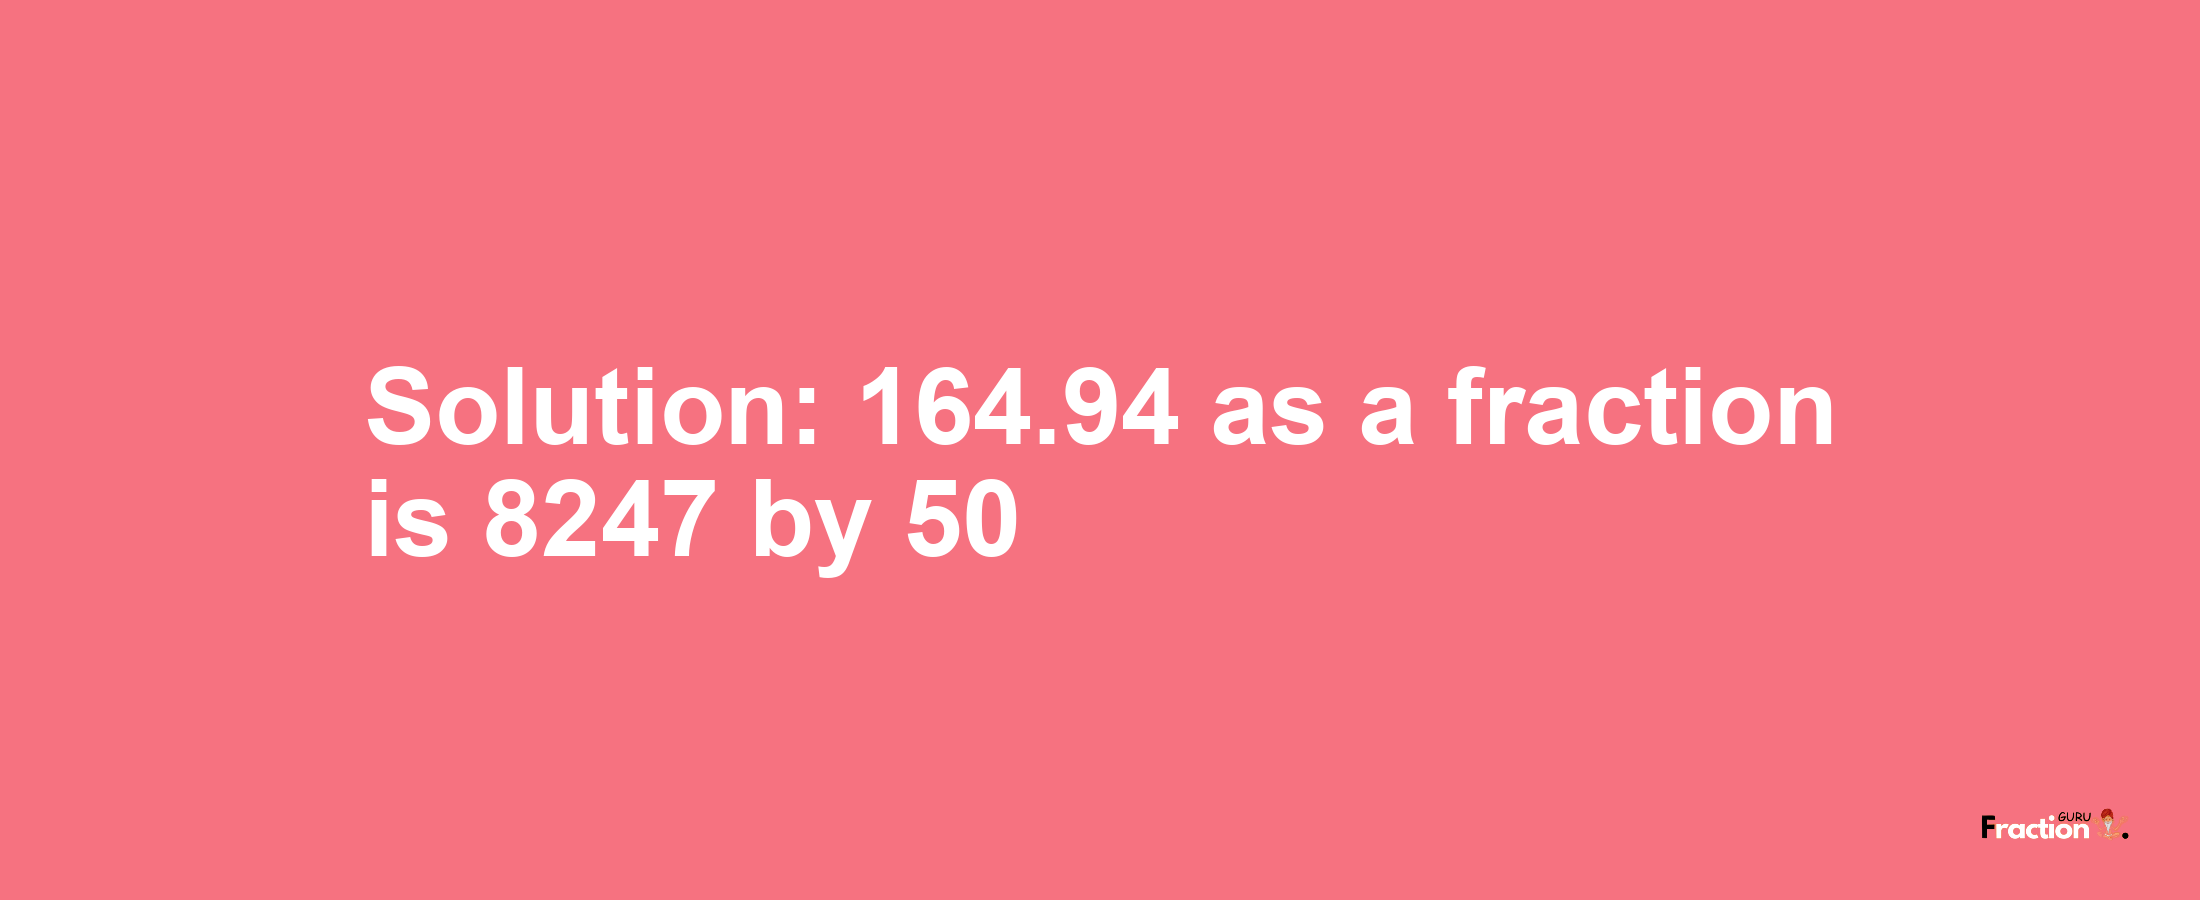 Solution:164.94 as a fraction is 8247/50